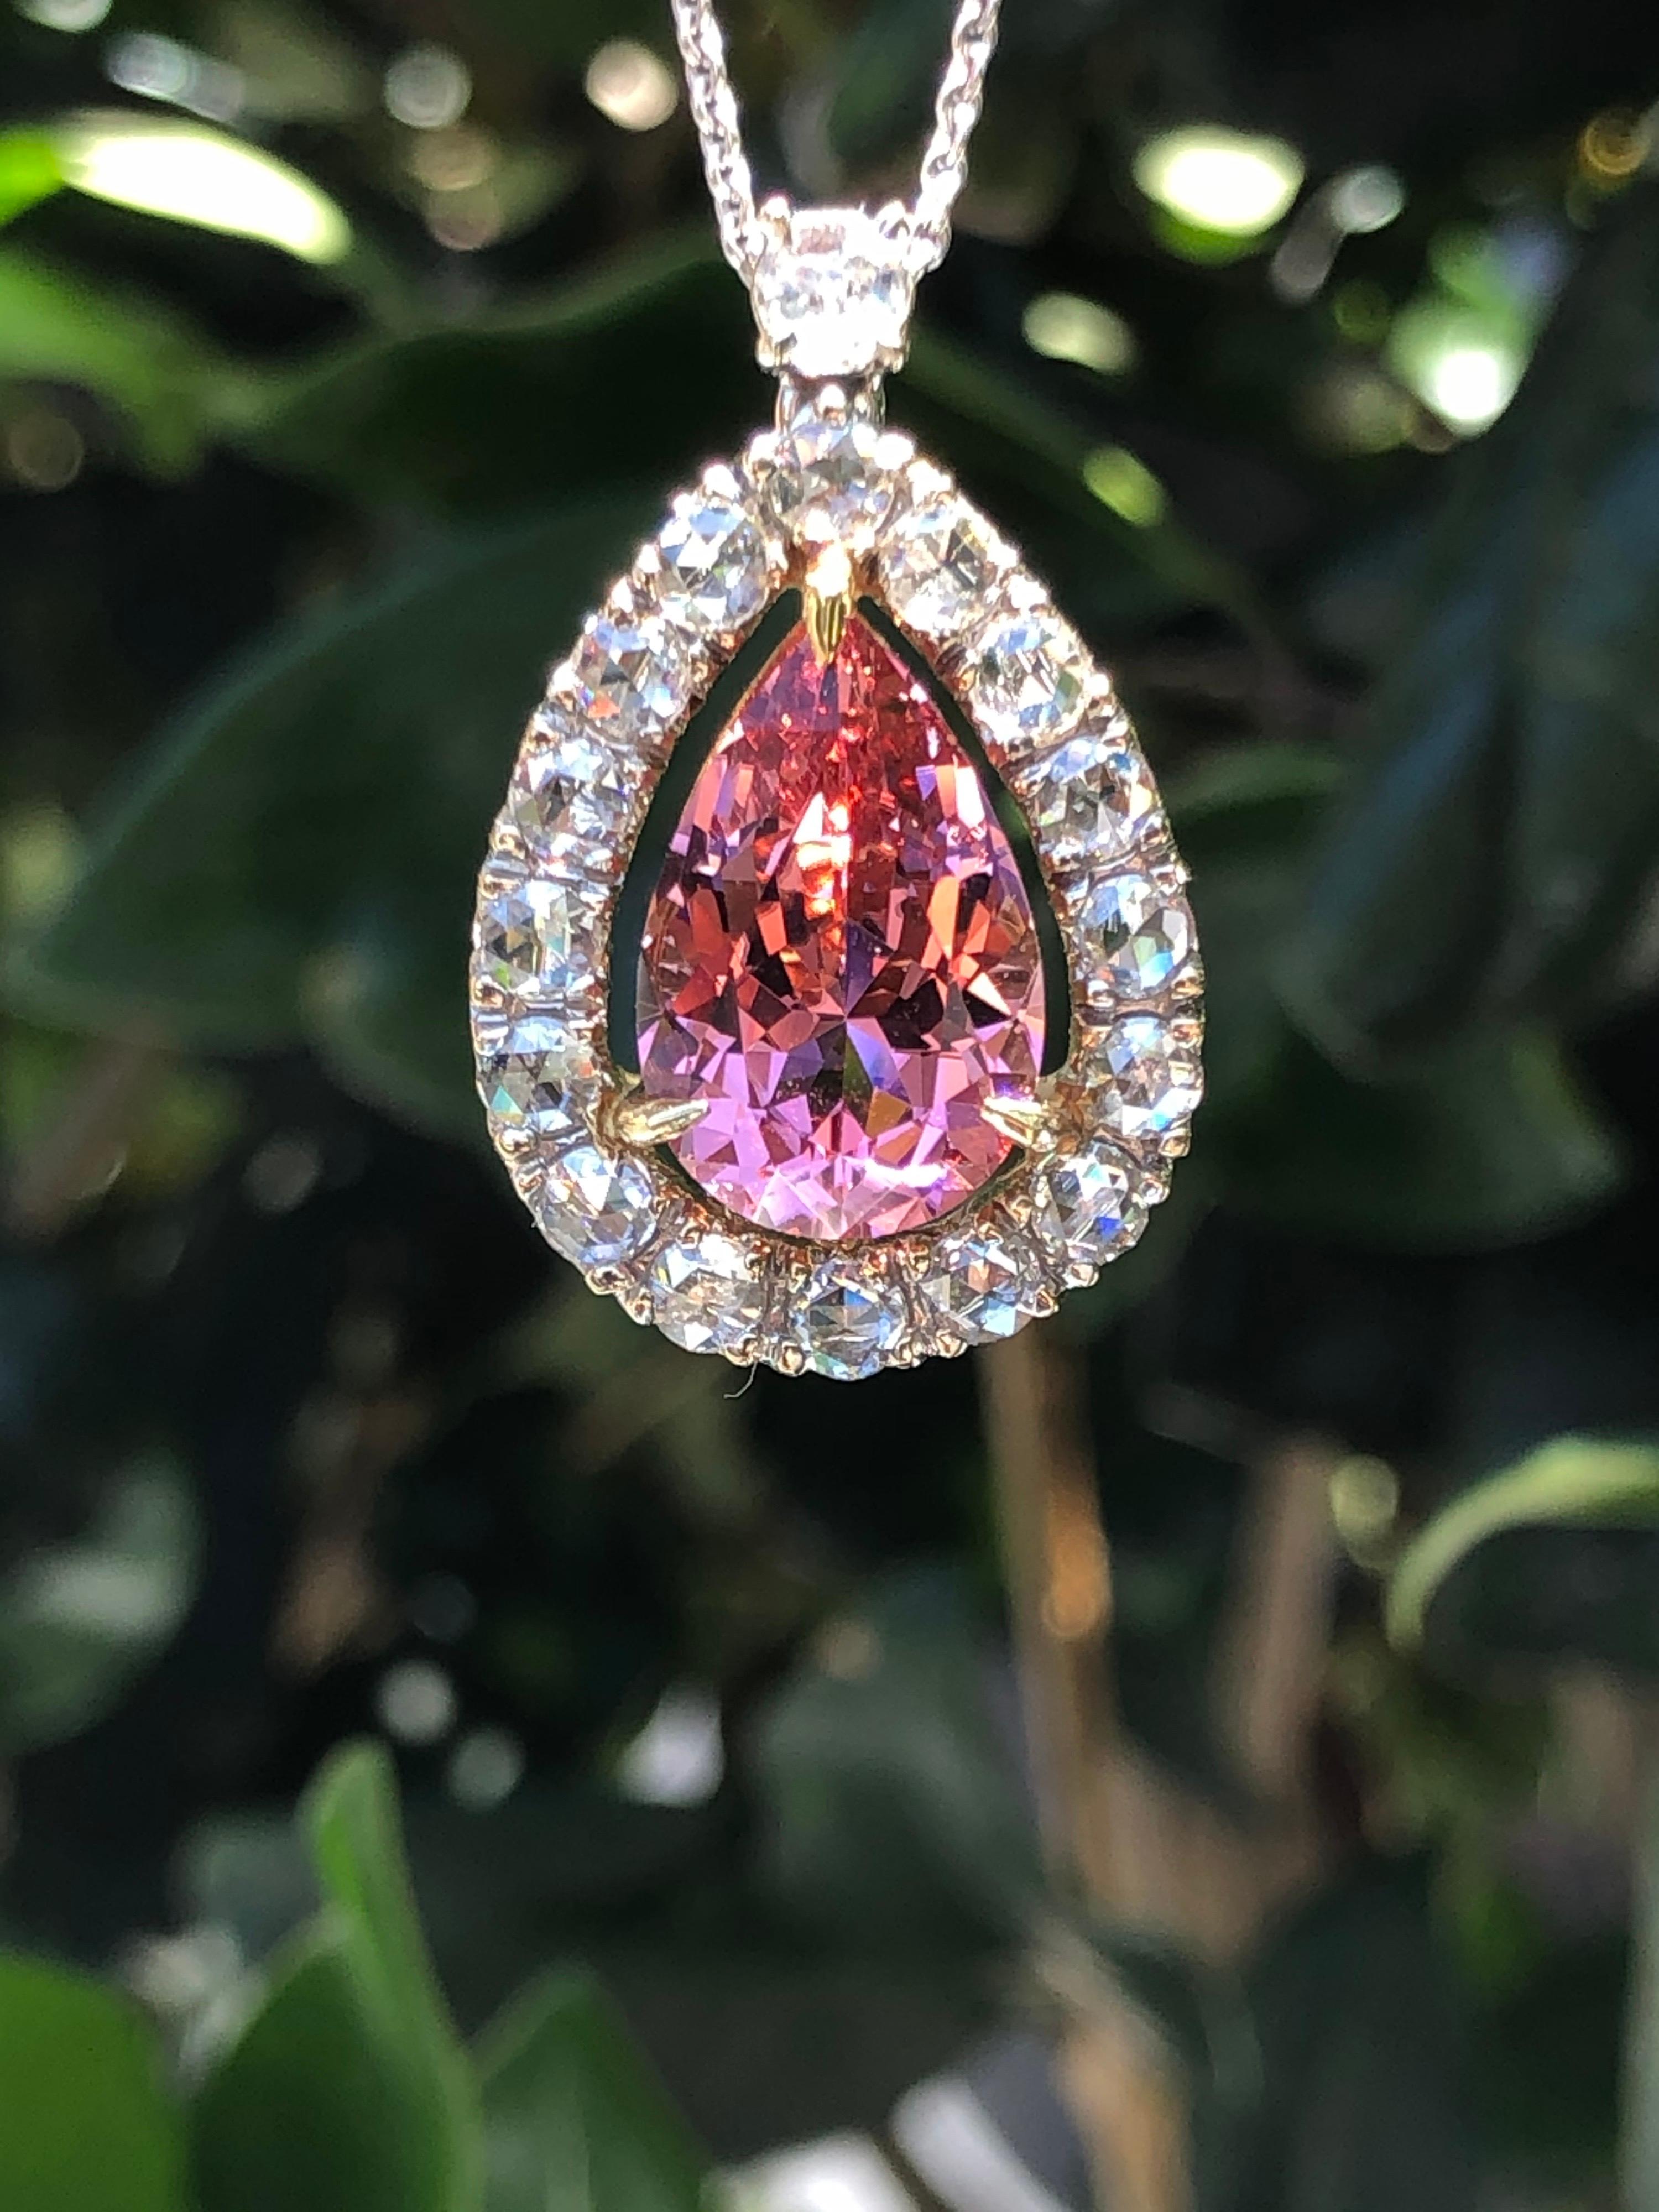 Gorgeous 4.70 carat pear shaped Pink Tourmaline is set in this 18K white and yellow gold pendant necklace , adorned by a total of 1.19 carat rose cut diamonds.
The chain length is 18